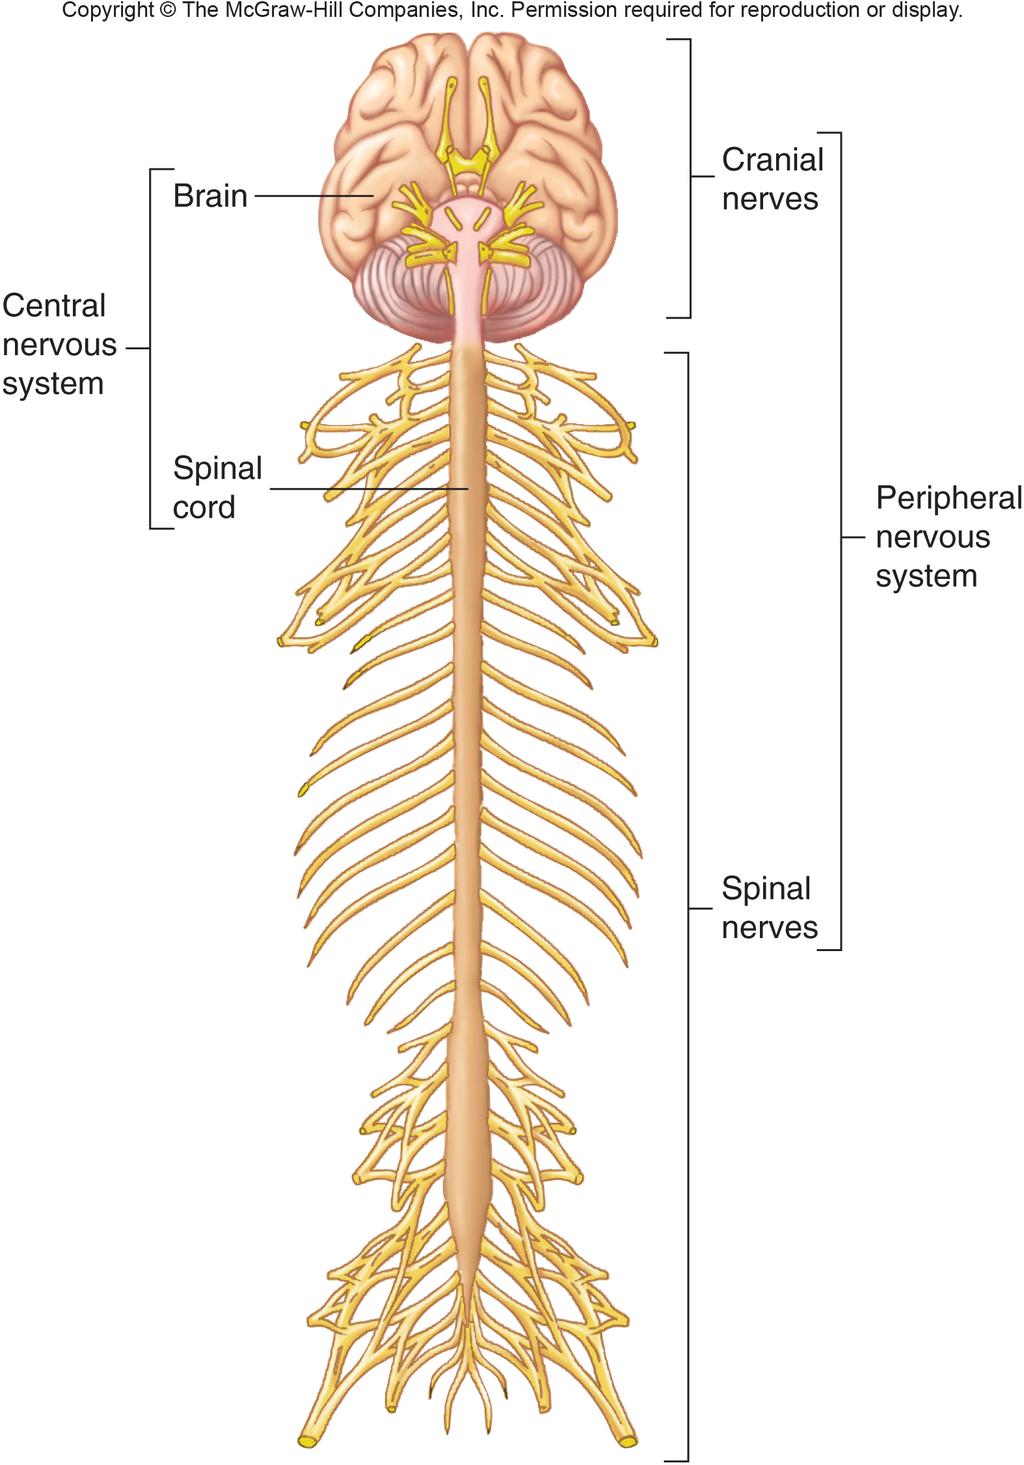 10/16/15 Divisions of Nervous System Nervous system divisions CNS PNS Sensory (in) Motor (out) Somatic Autonomic Sympathetic Parasympathetic Divisions of Nervous System Central nervous system (CNS)